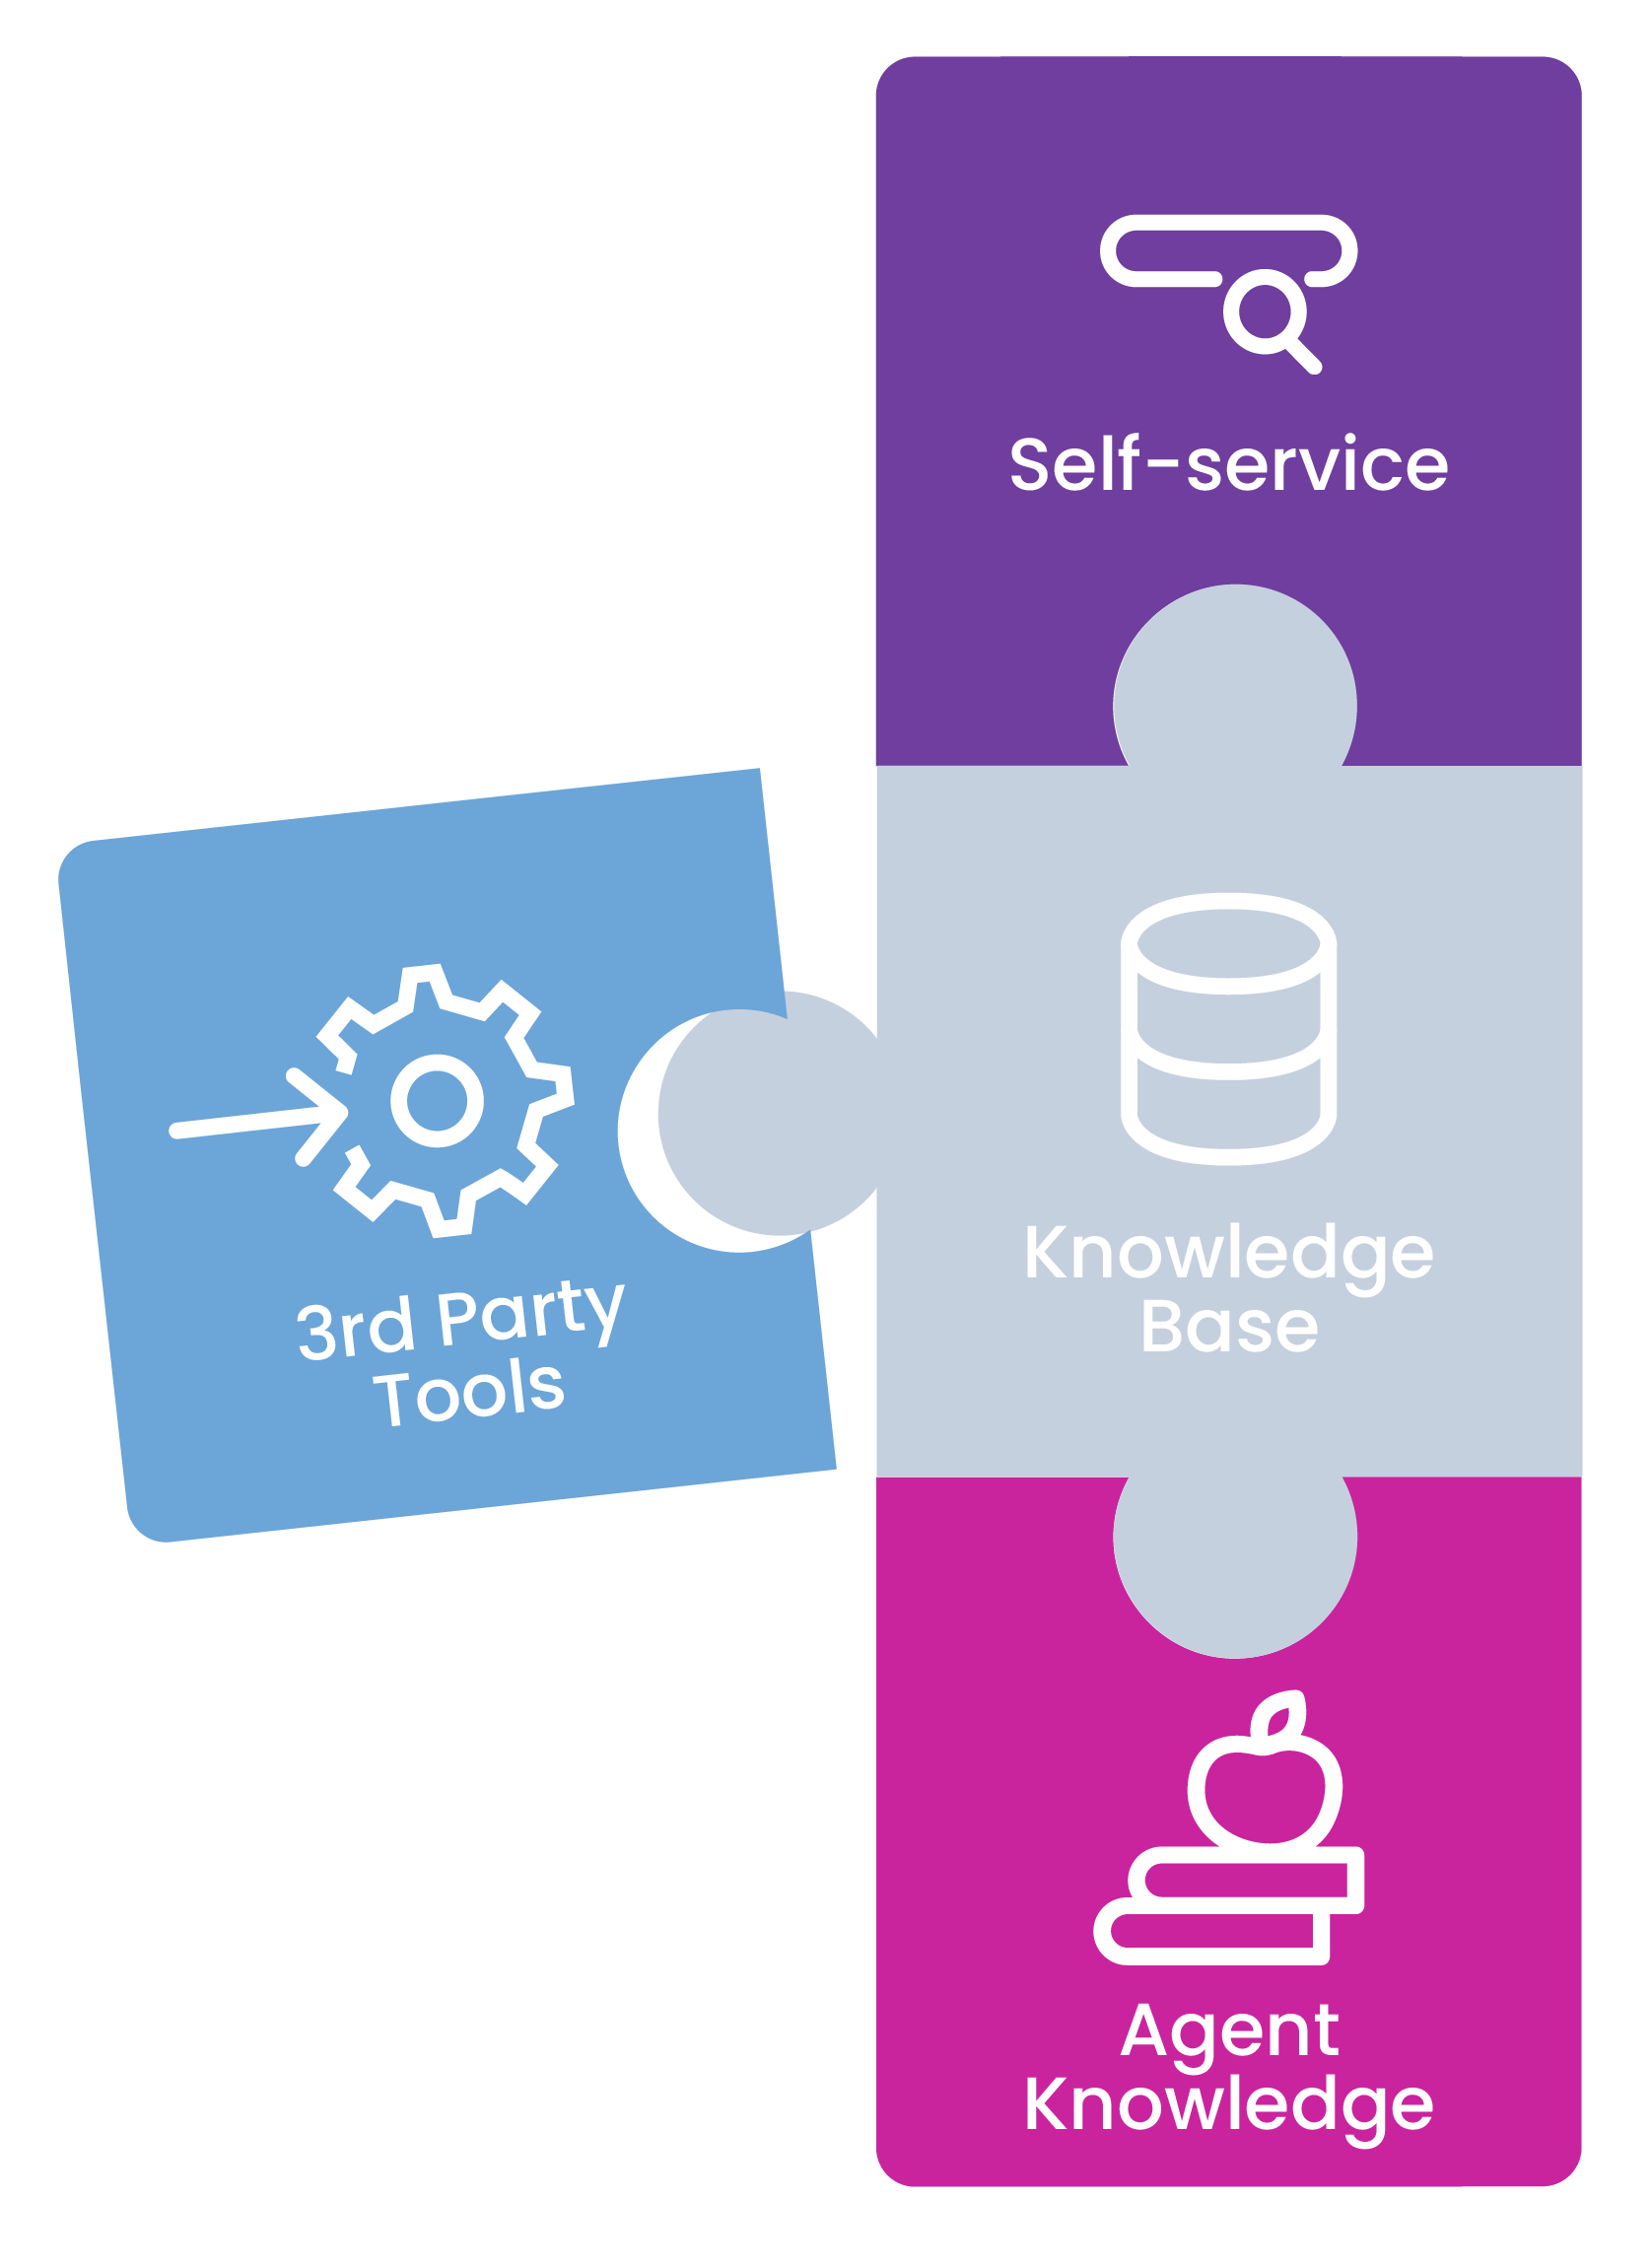 An image showing how Self-Service, 3rd Party Tools and Contact Centres all integrate with Knowledge